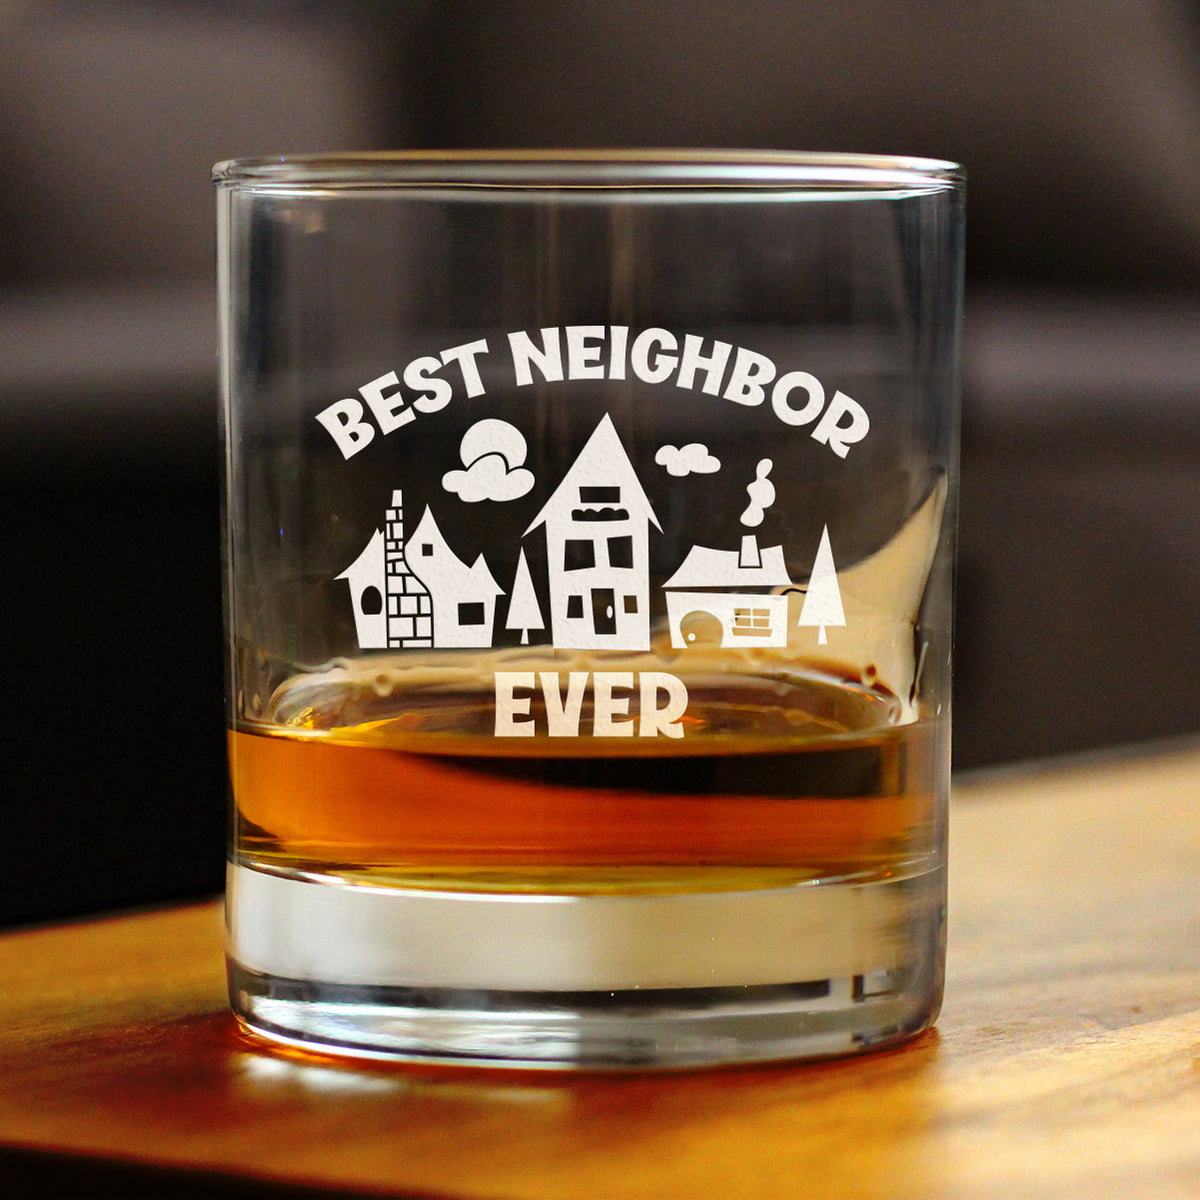 Best Neighbor Ever - 10 oz Rocks Glass or Old Fashioned Glass, Etched Sayings, Moving Gift